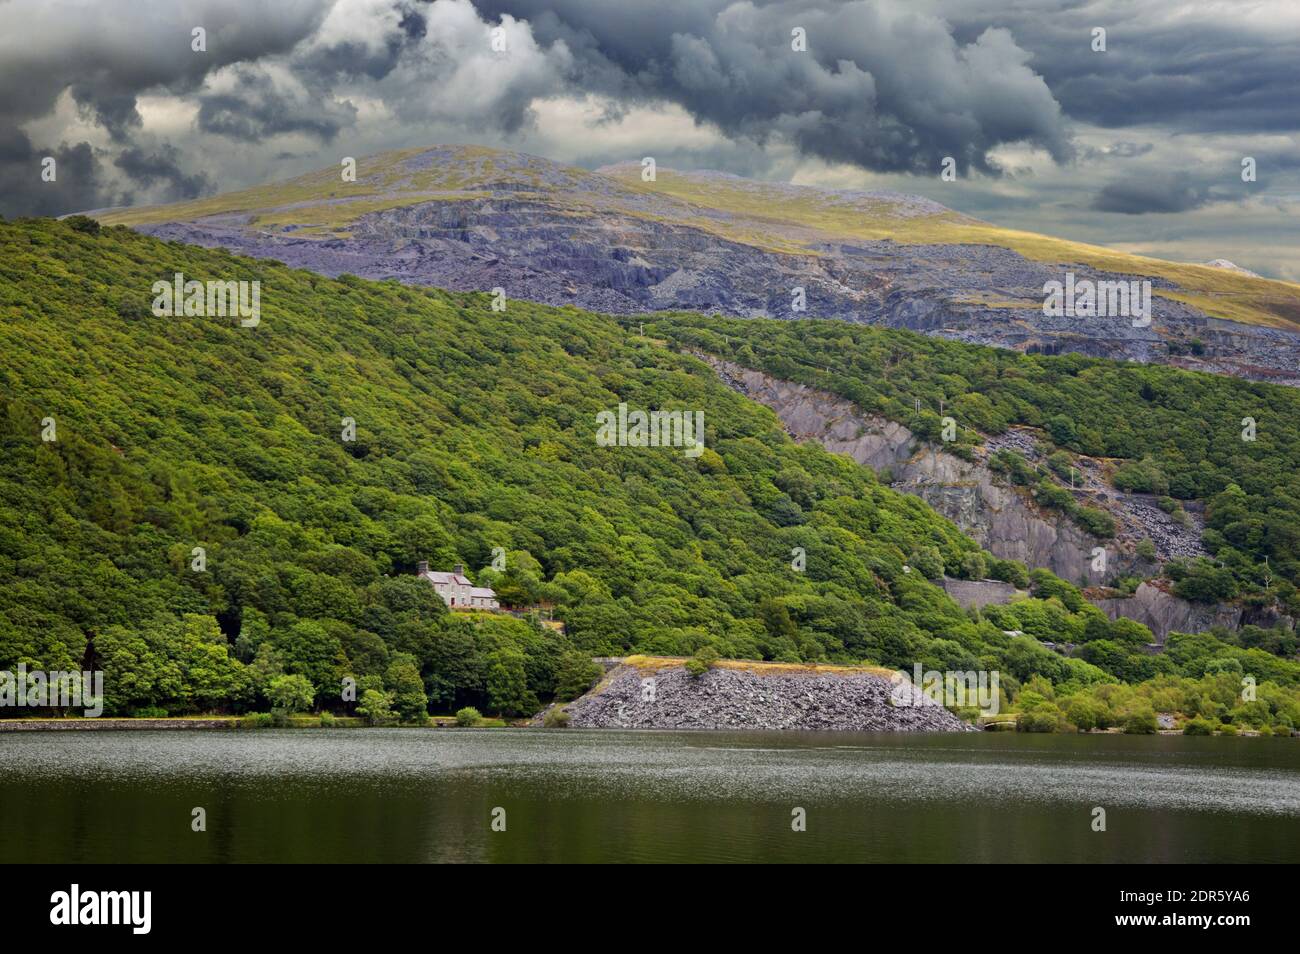 Coed Dinorwig is an impressive ancient woodland on a hillside overlooking Llyn Padarn next to Llanberis in the Snowdonia National Park. Stock Photo